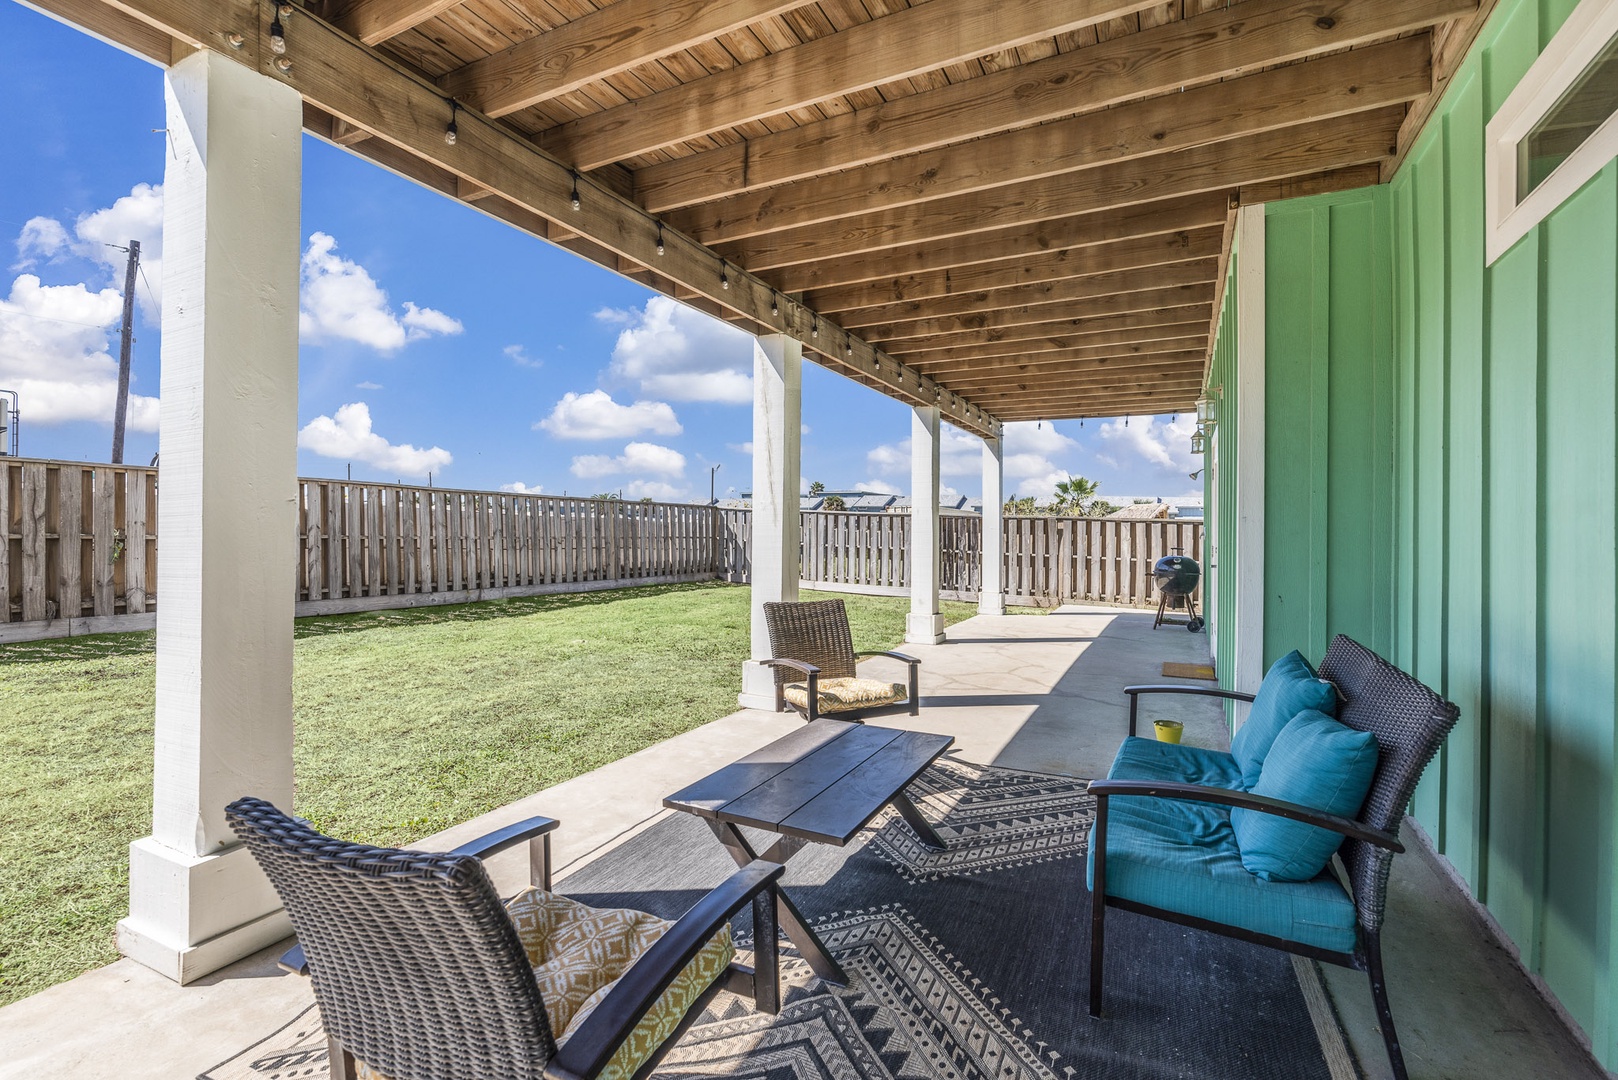 Enjoy the fresh air and tranquility on the lower-level back patio